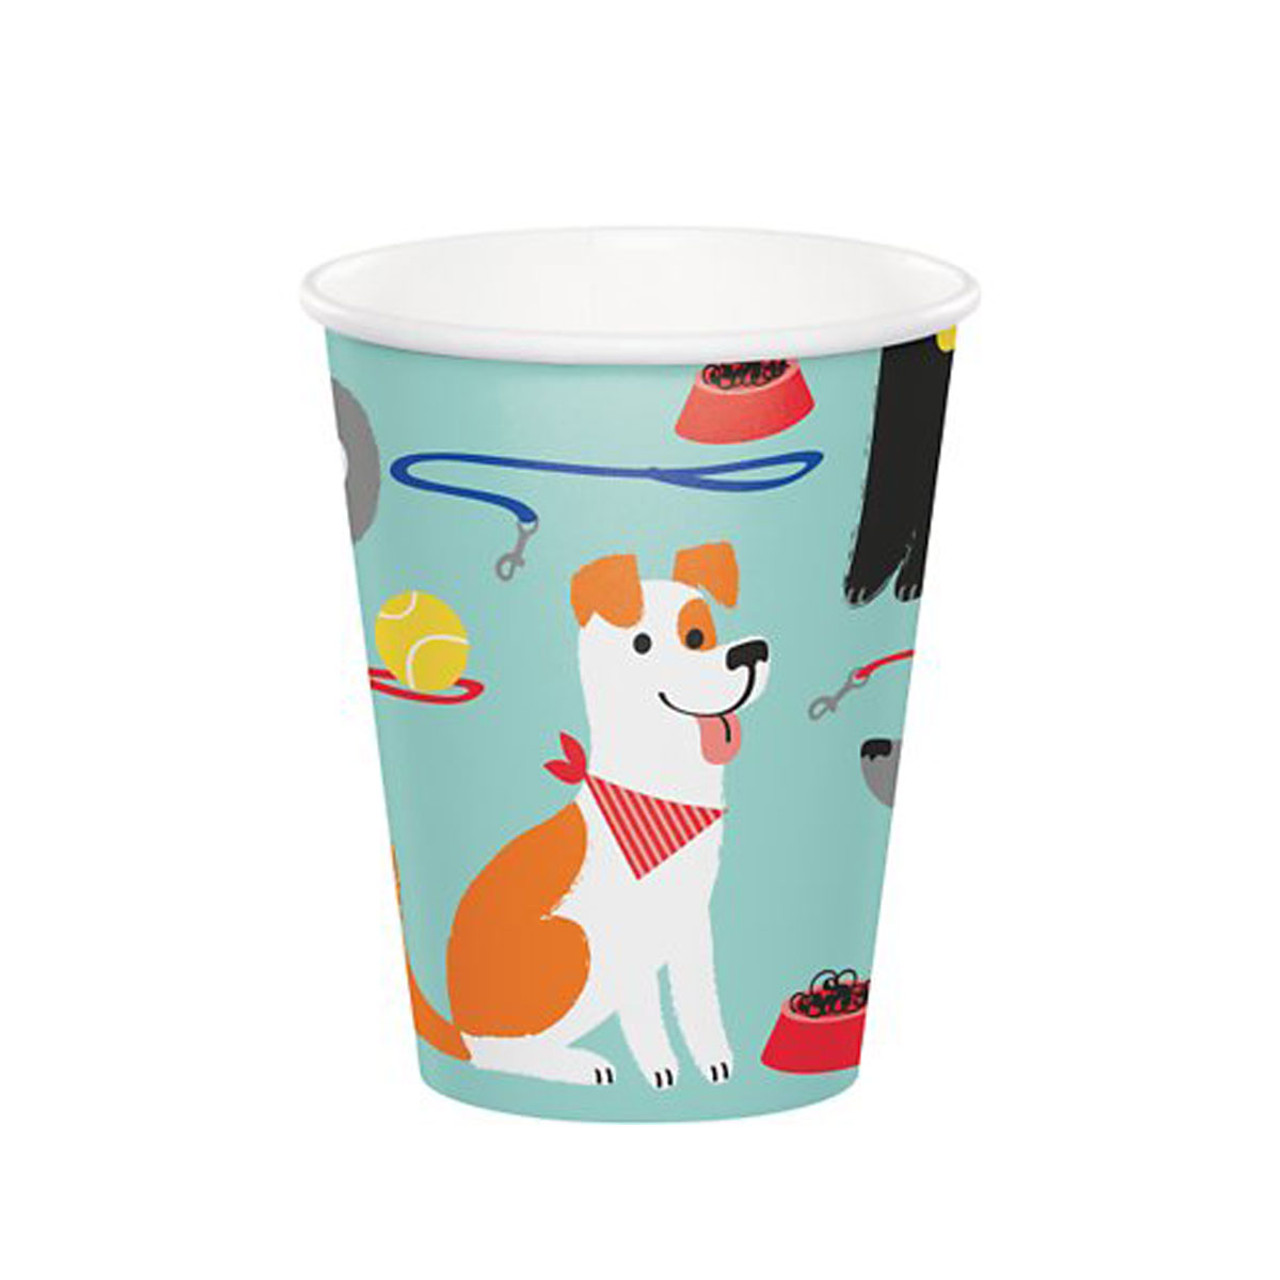 https://cdn11.bigcommerce.com/s-hnm2fcoh/images/stencil/1280x1280/products/5043/21629/Puppy-Party-9oz-Cups__67289.1540056412.jpg?c=2